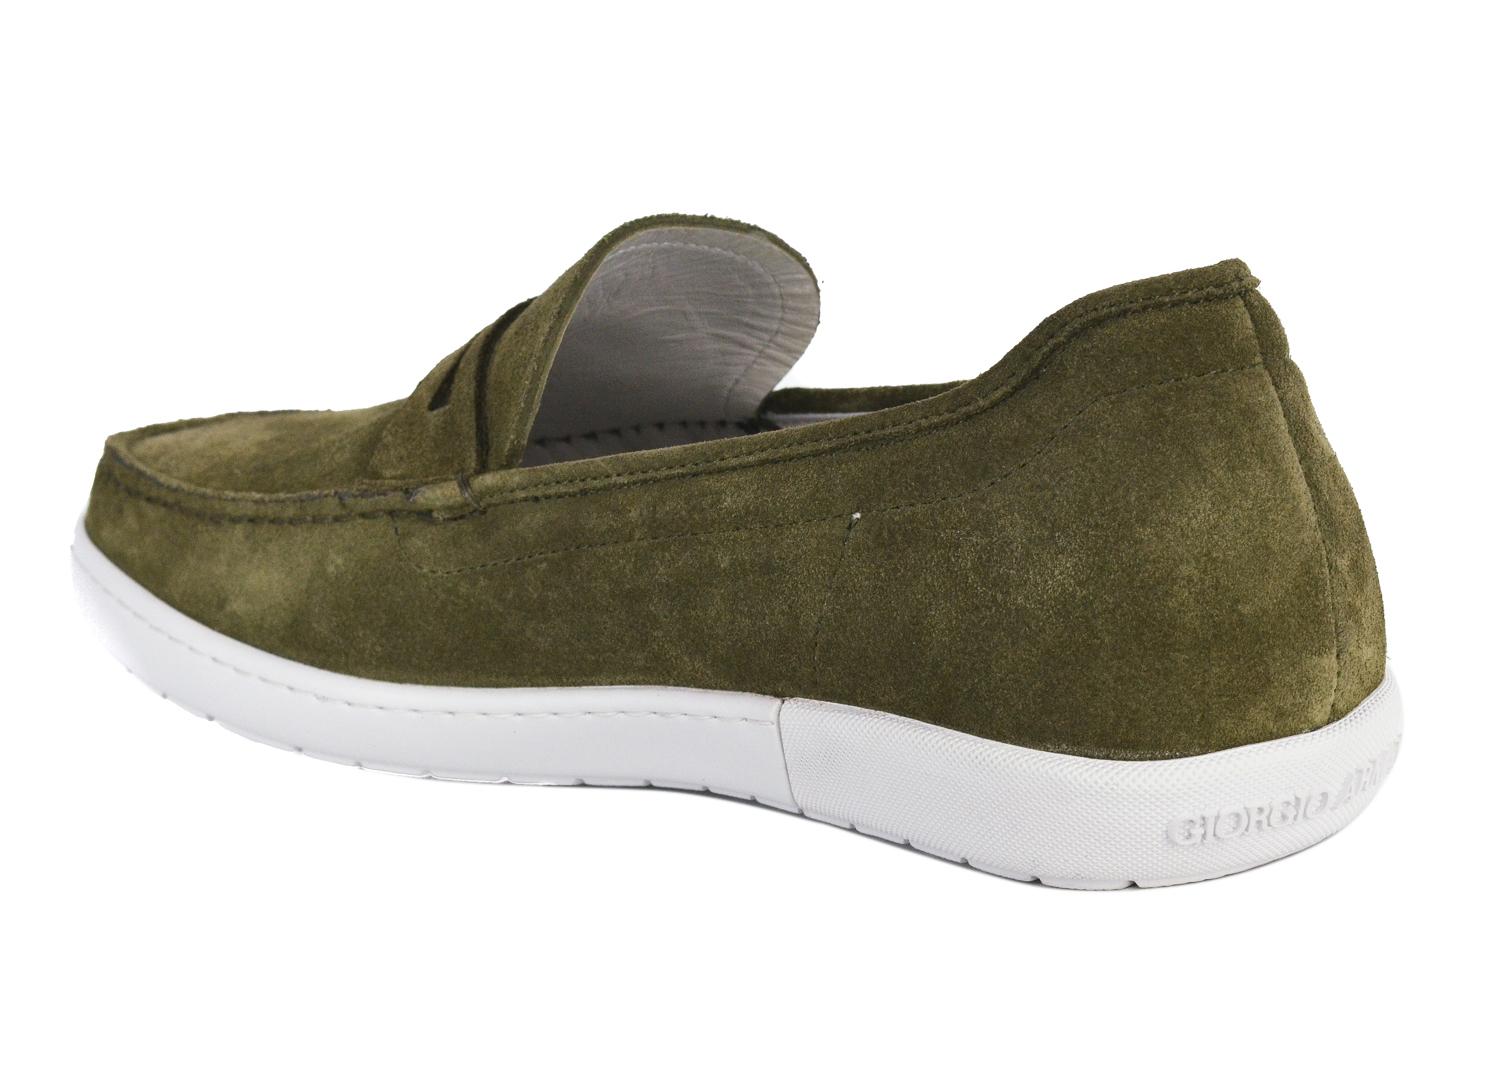 Giorgio Armani Mens Green Suede Penny Bar Loafers In New Condition For Sale In Brooklyn, NY